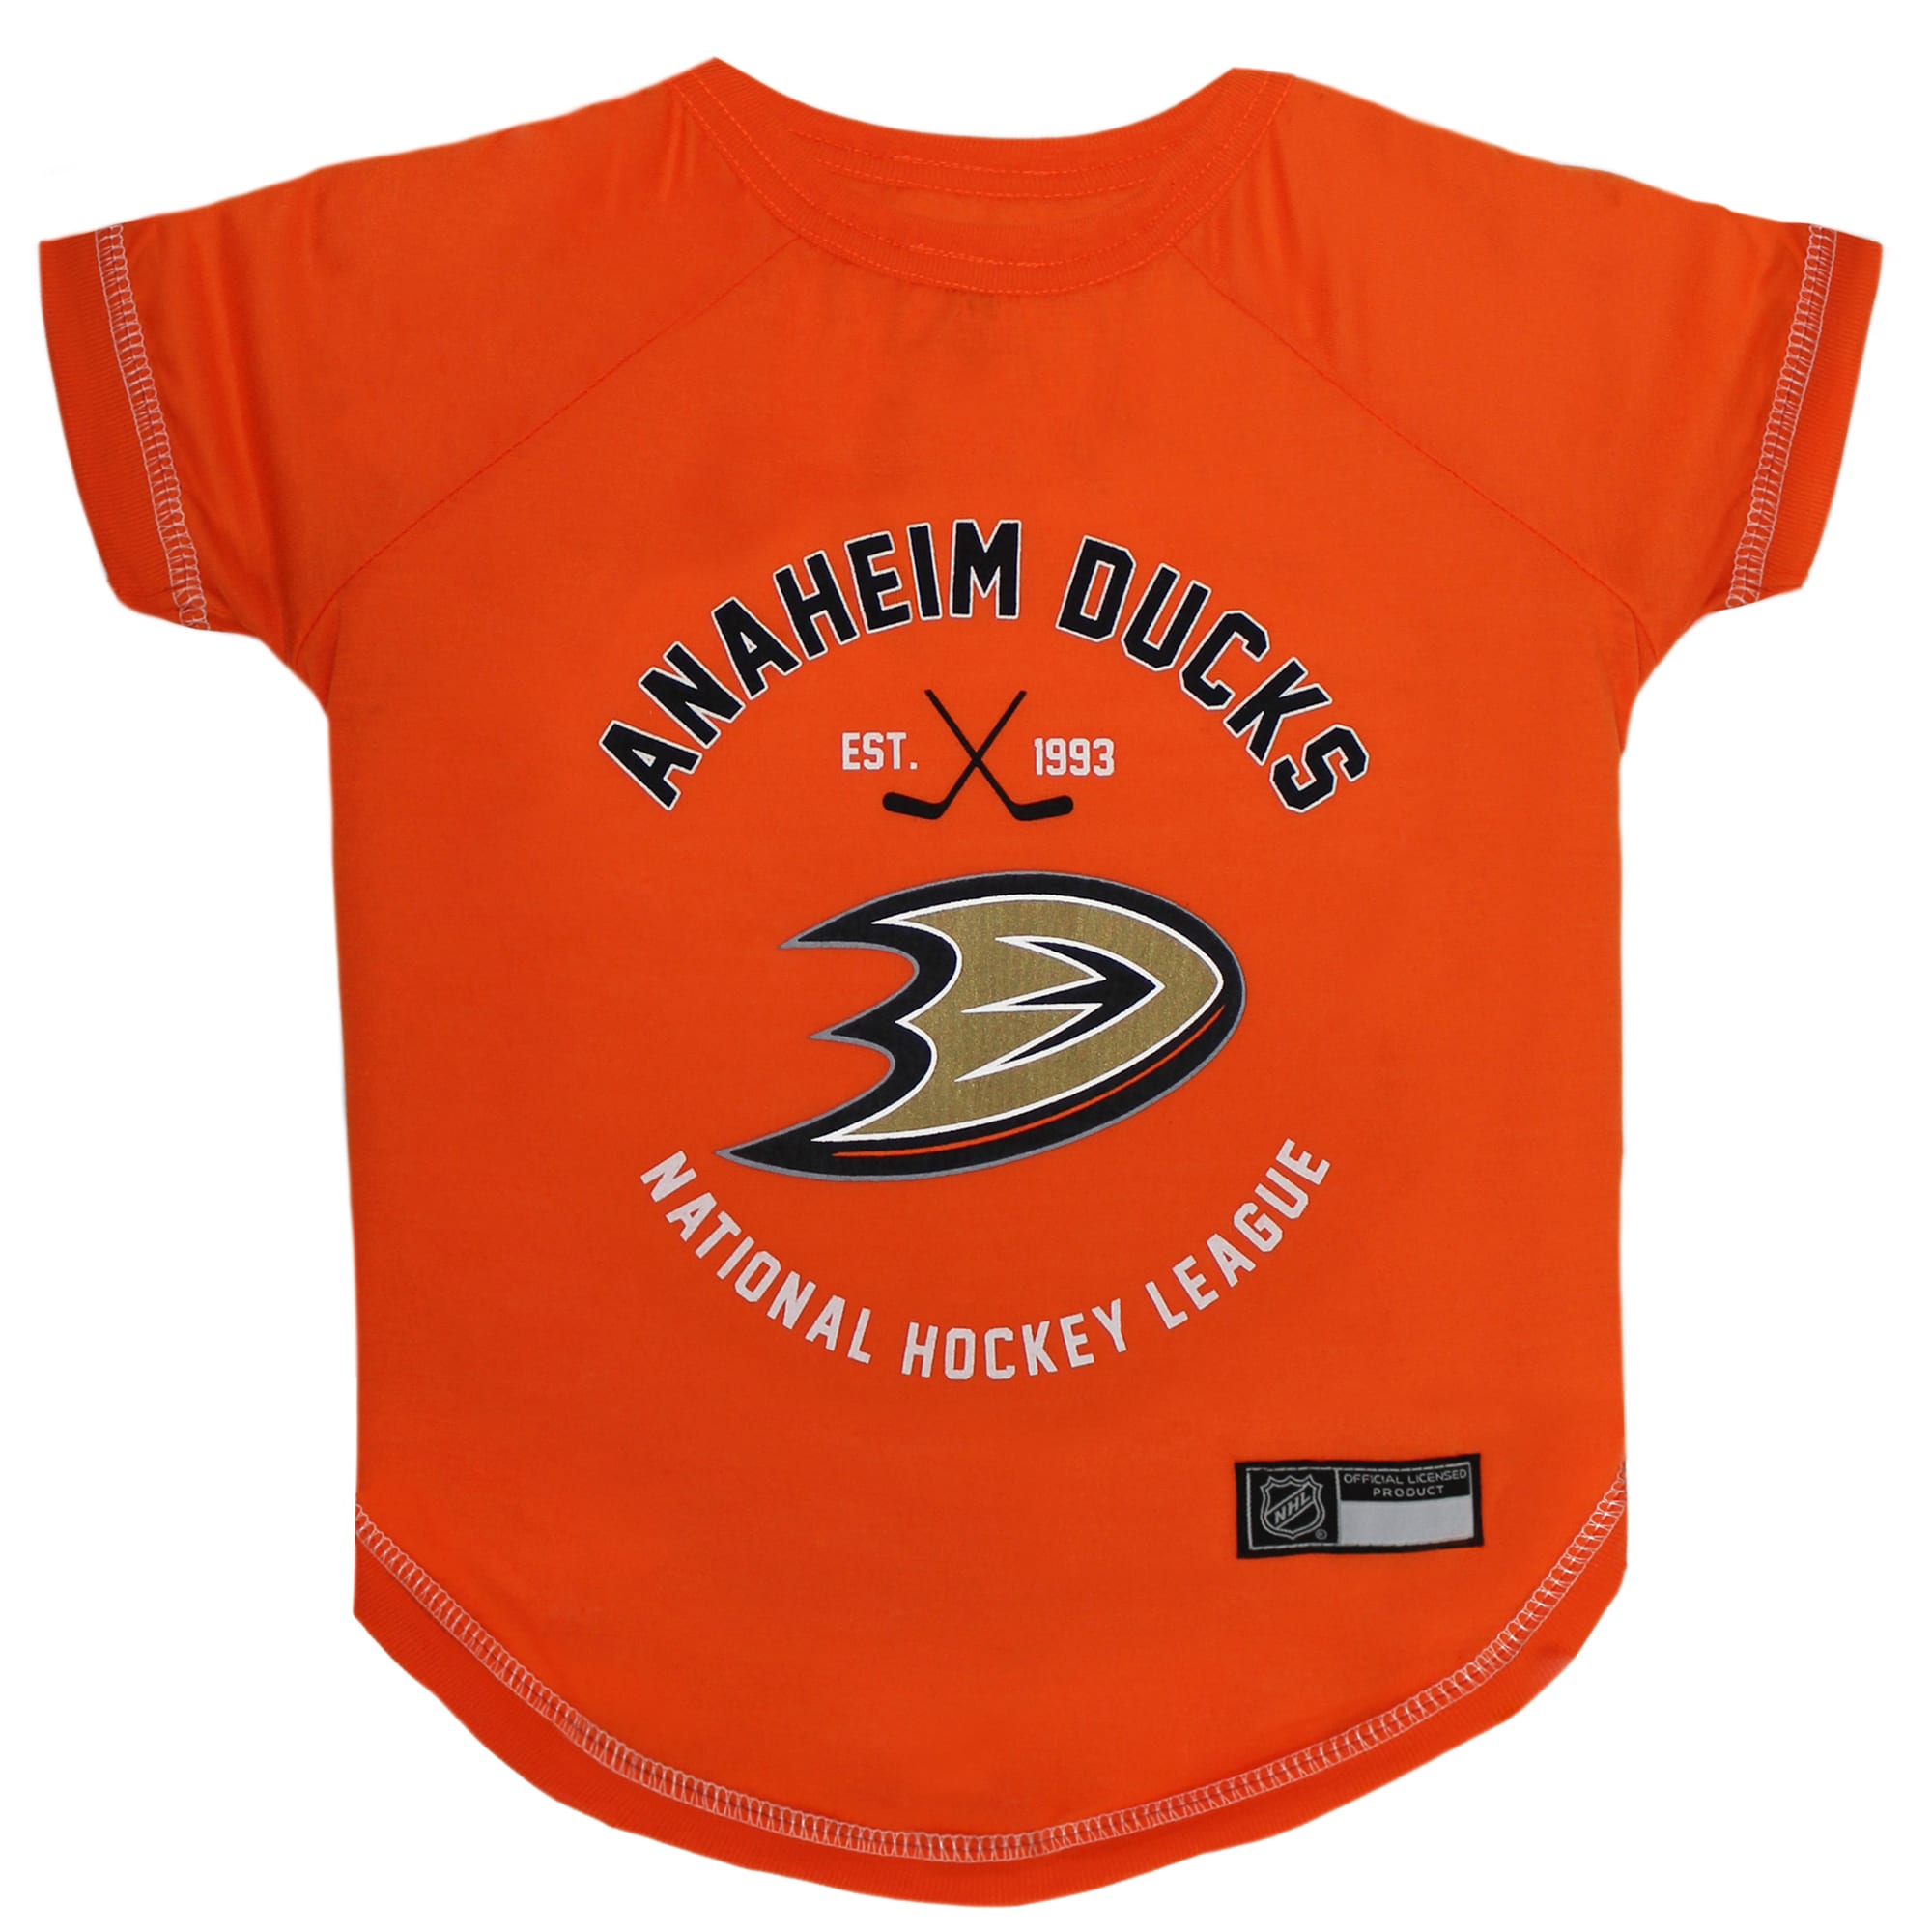 Mighty Ducks jersey  Hockey shirts, Duck, Clothes